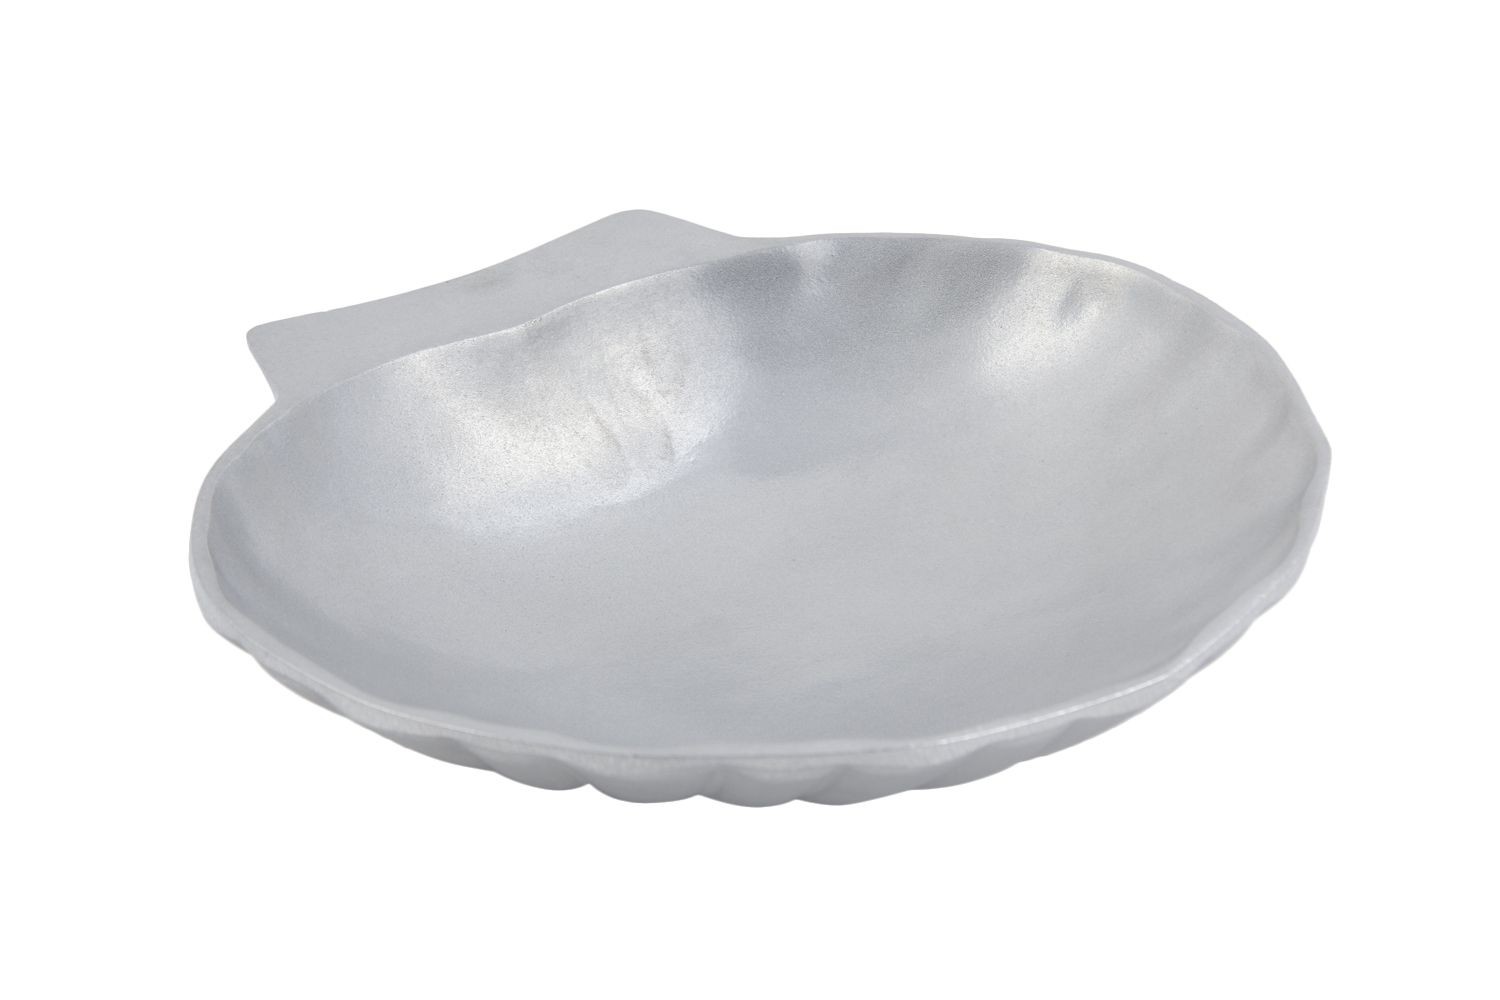 Bon Chef 5014P Seafood Baking Shell, Pewter Glo 10" x 9 1/2", Set of 6